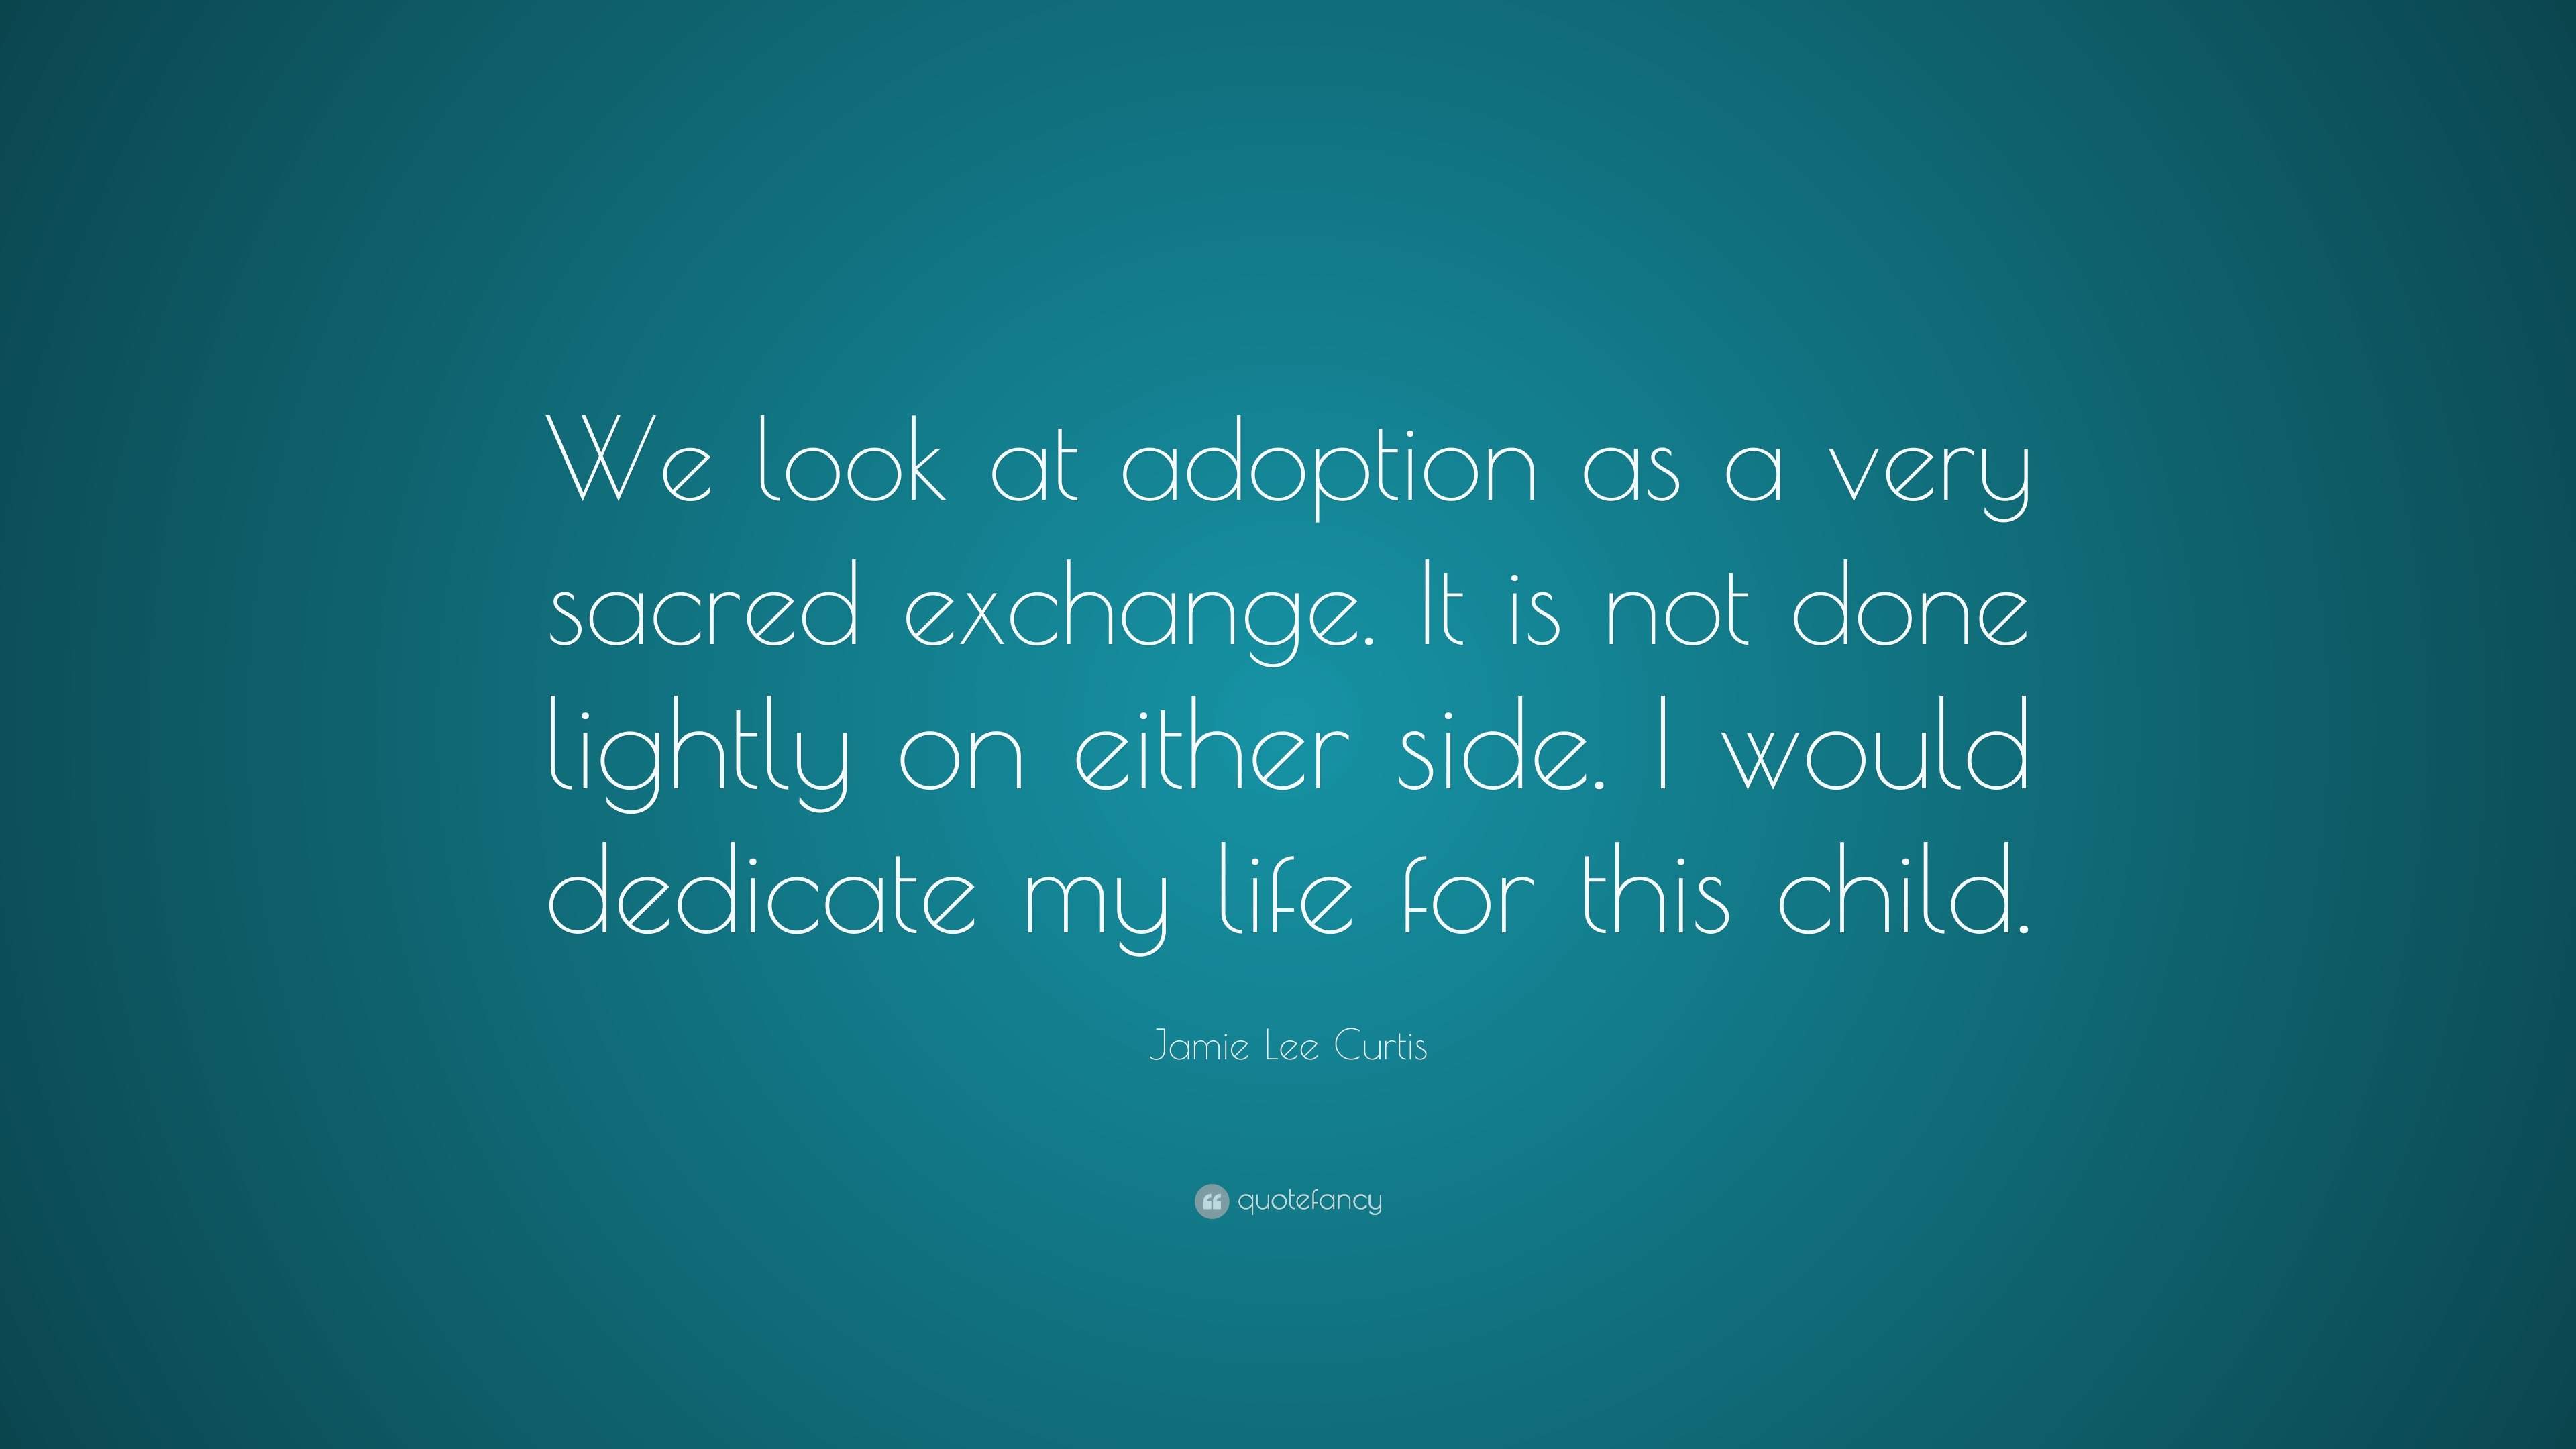 jamie lee curtis book about adoption